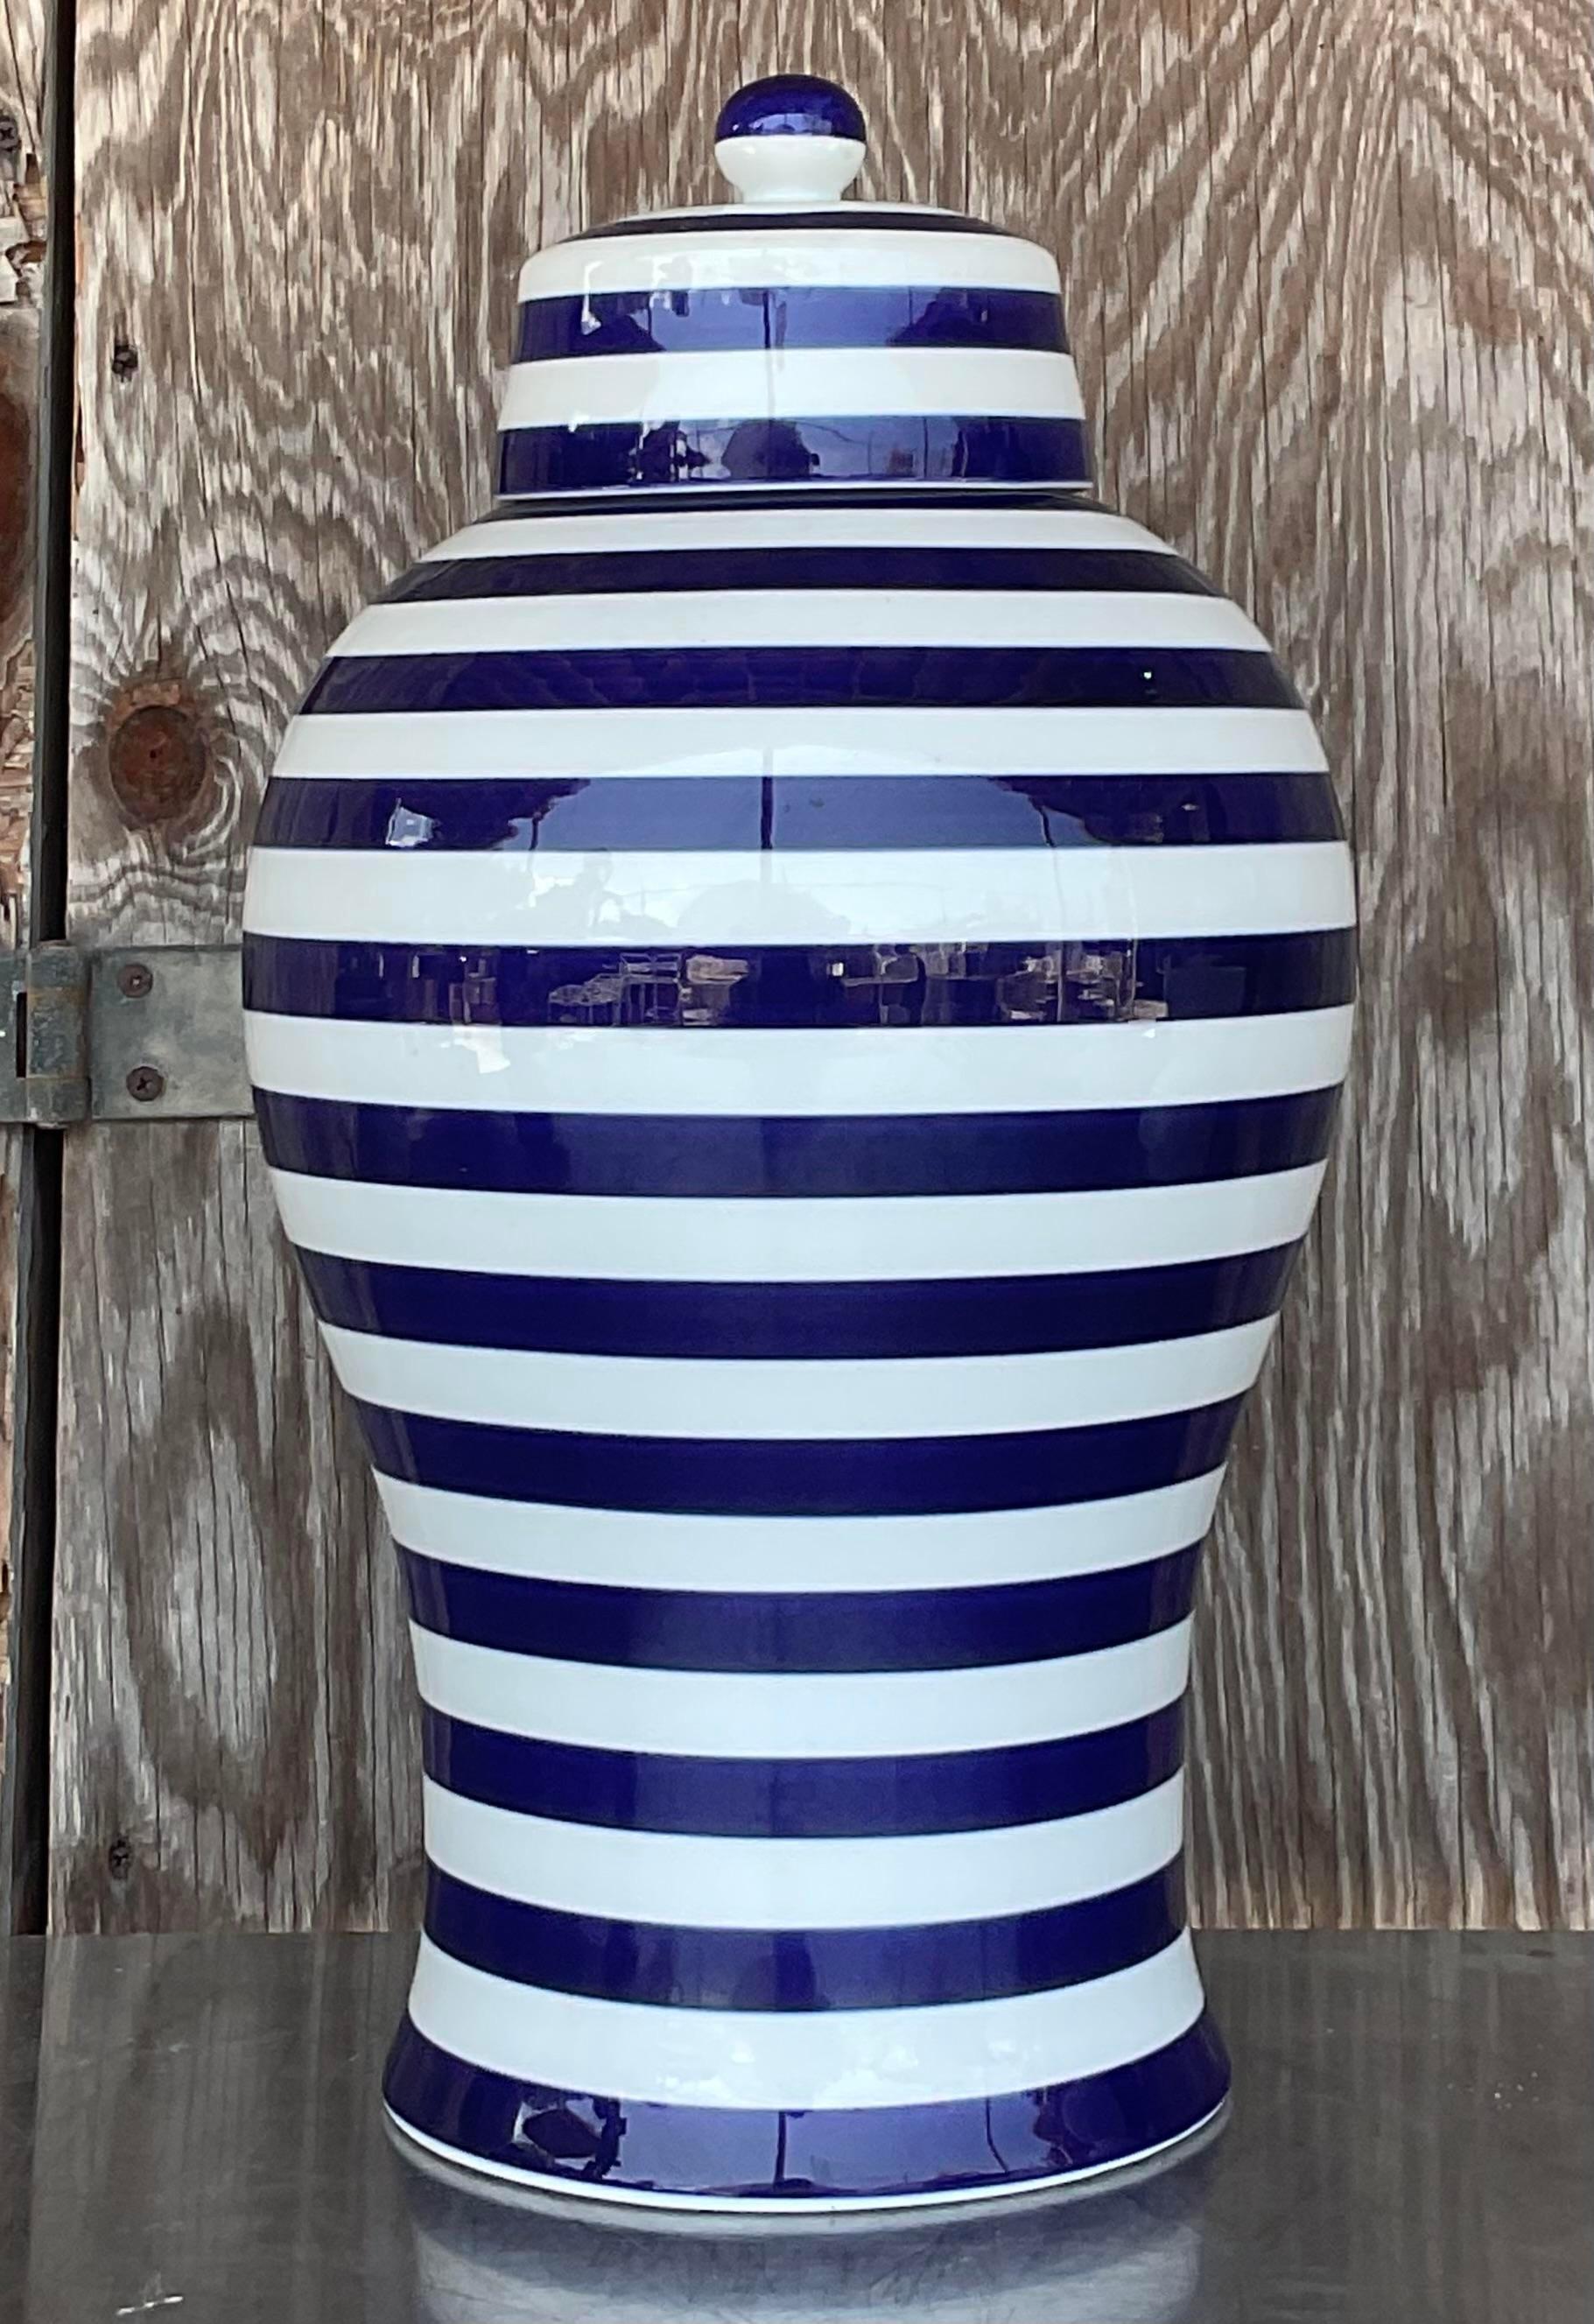 A fabulous vintage Contemporary ginger jar. Beautiful glazed ceramic with a chic striped design. Acquired from a Palm Beach estate.